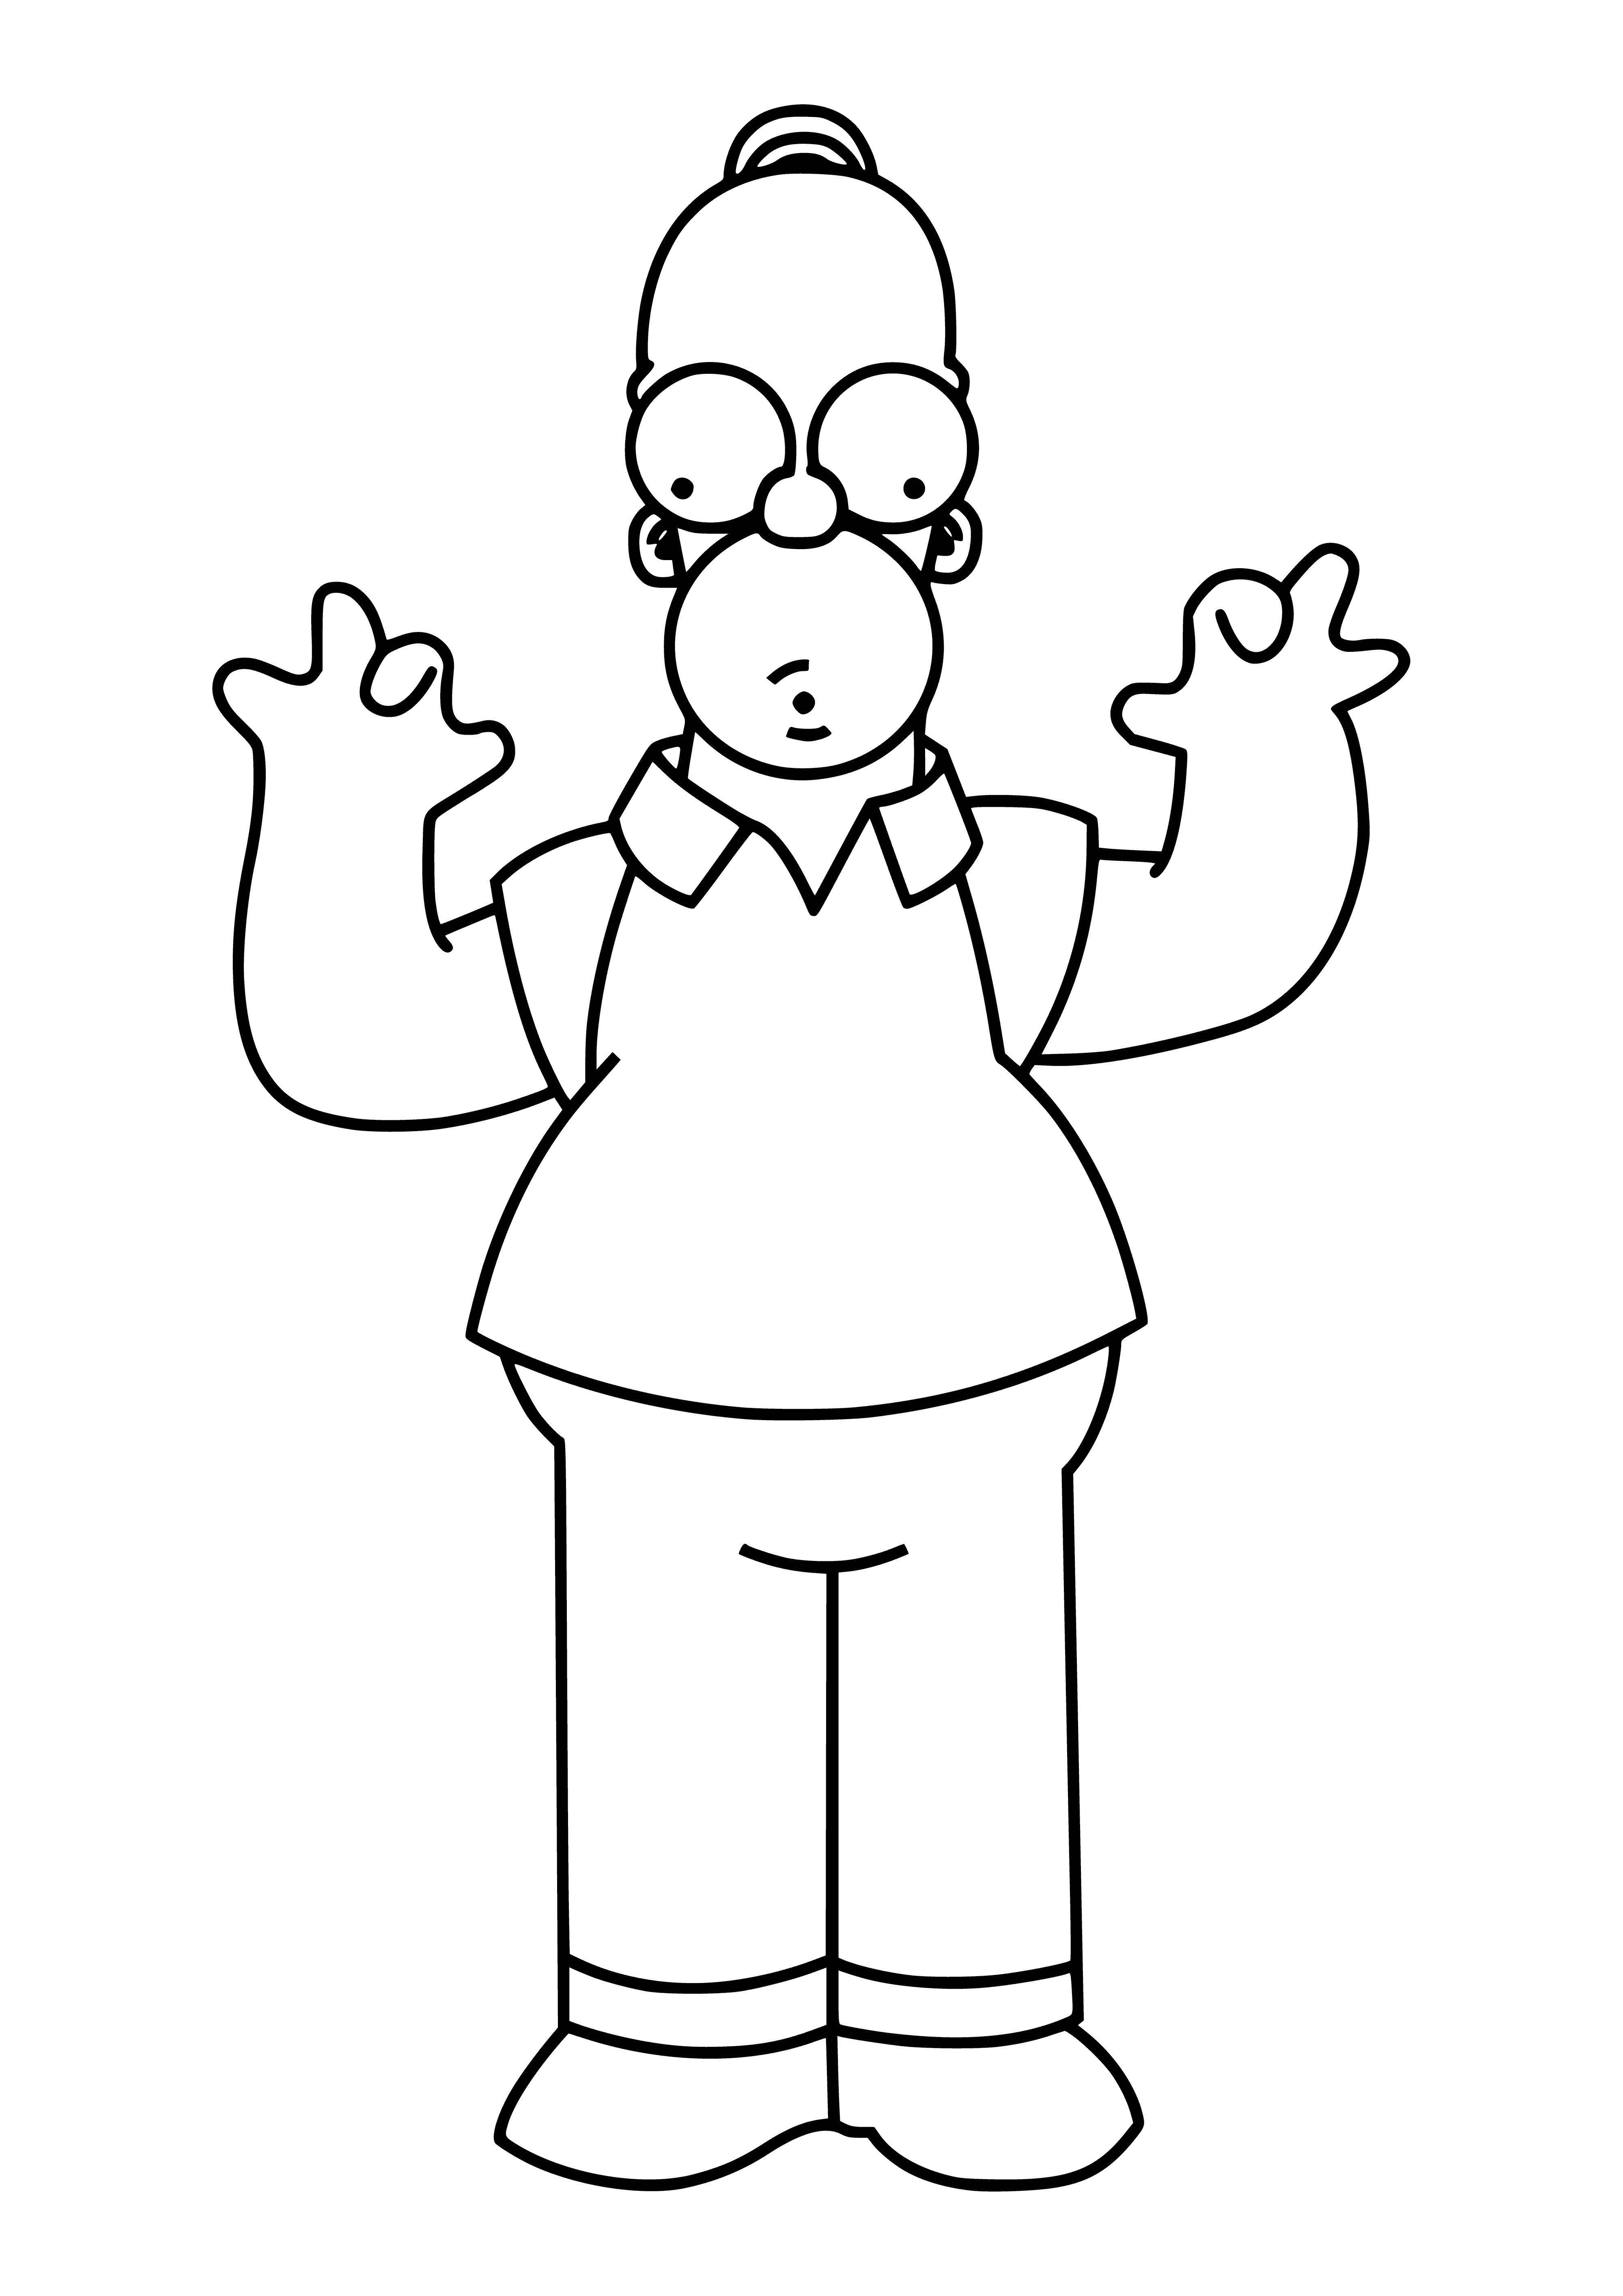 Homer Simpson coloring page